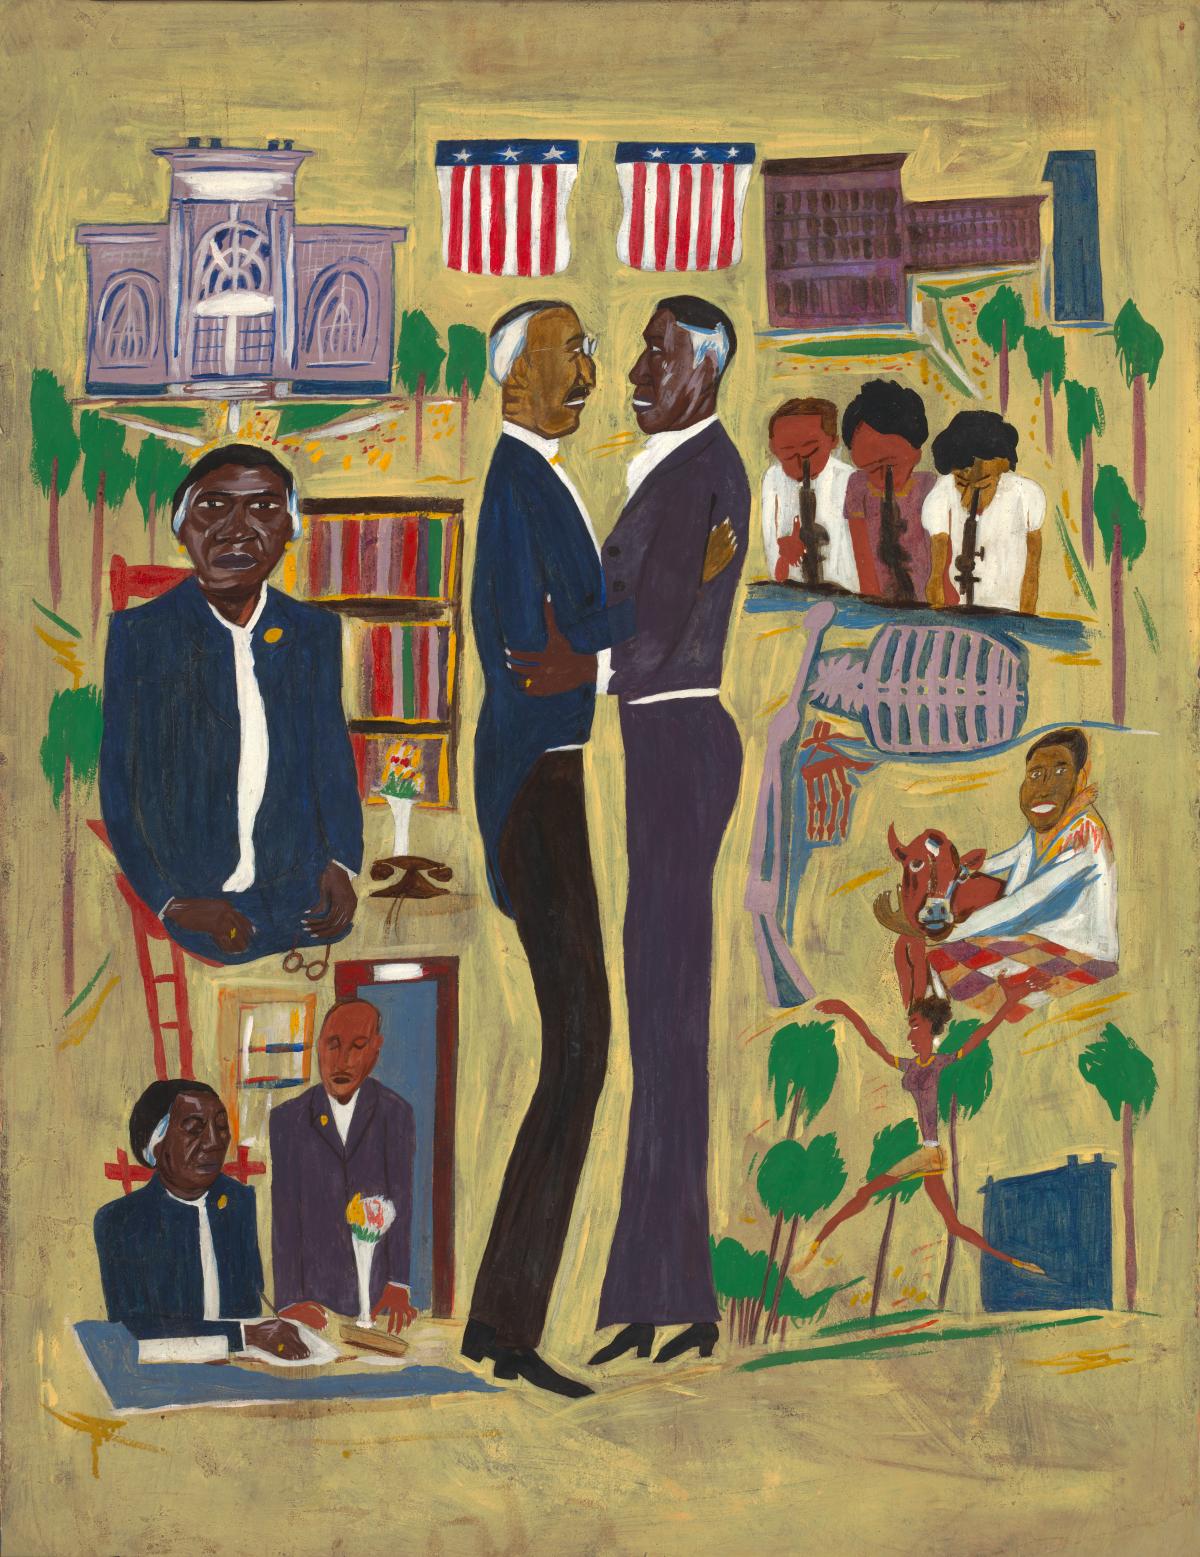 Scenes of Mary McLoud Bethune's life with two men embracing in the center.